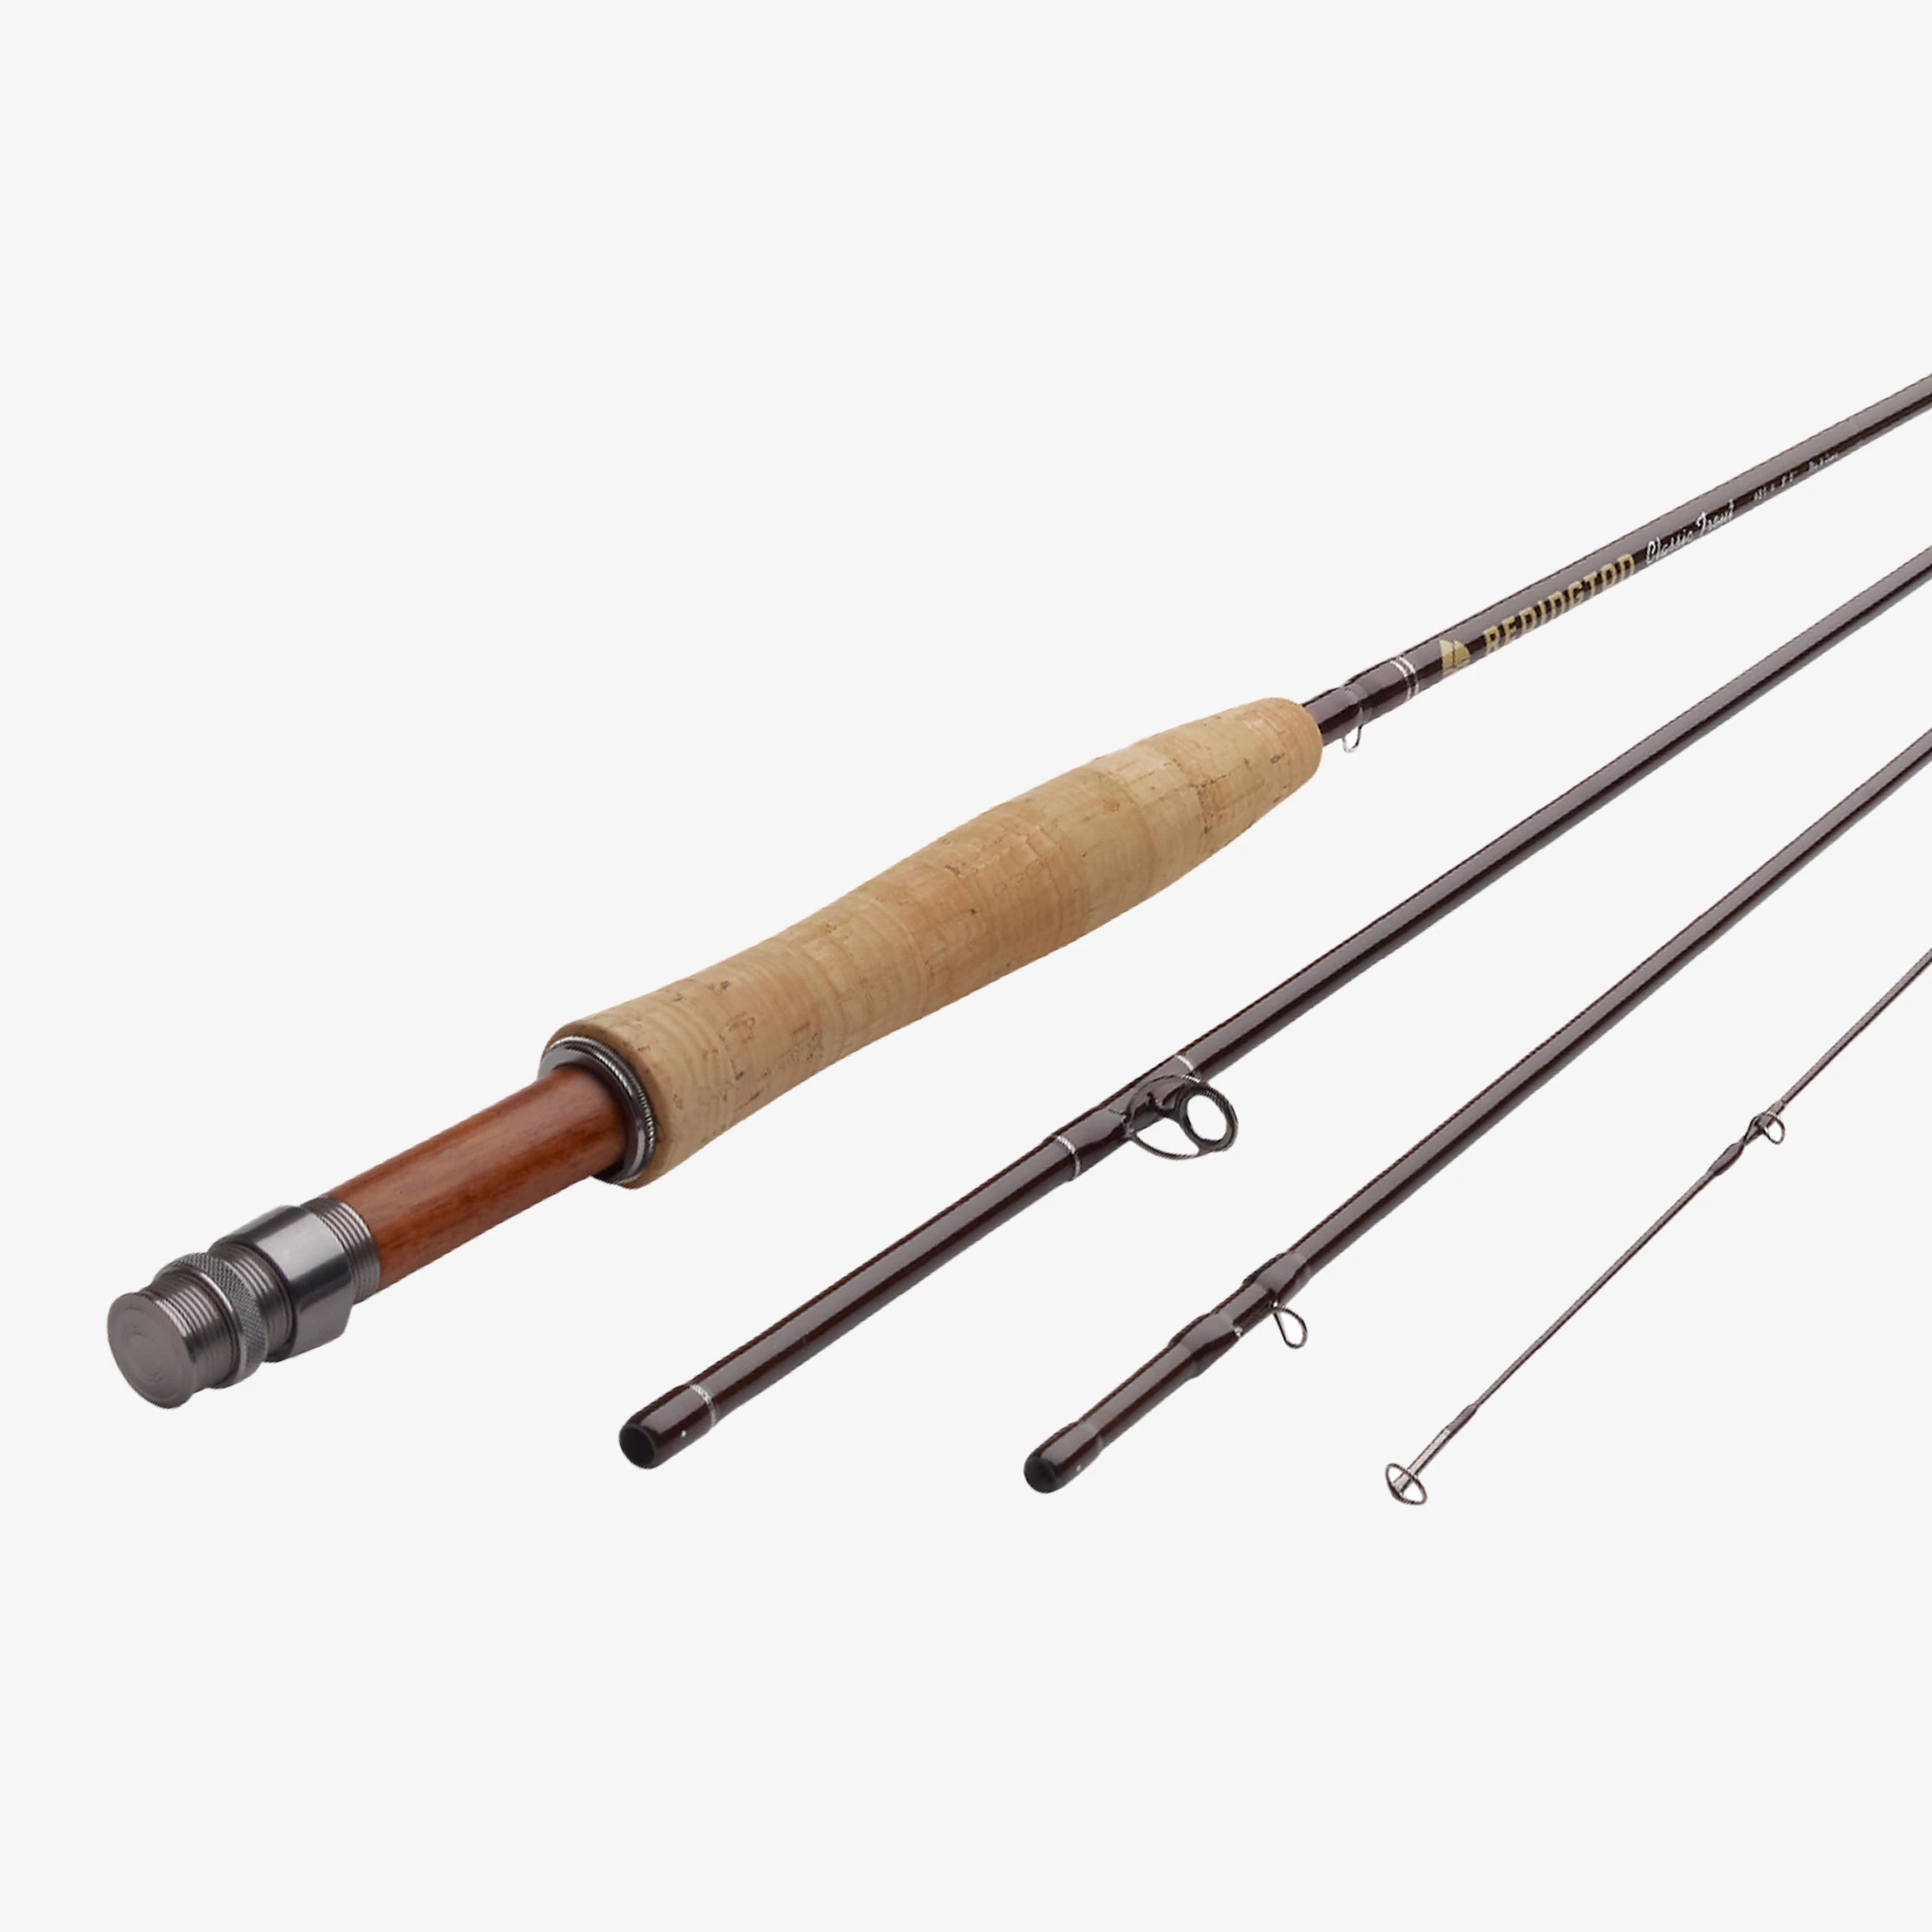 Redington Field Kit - Tropical Saltwater - The Fly Shack Fly Fishing